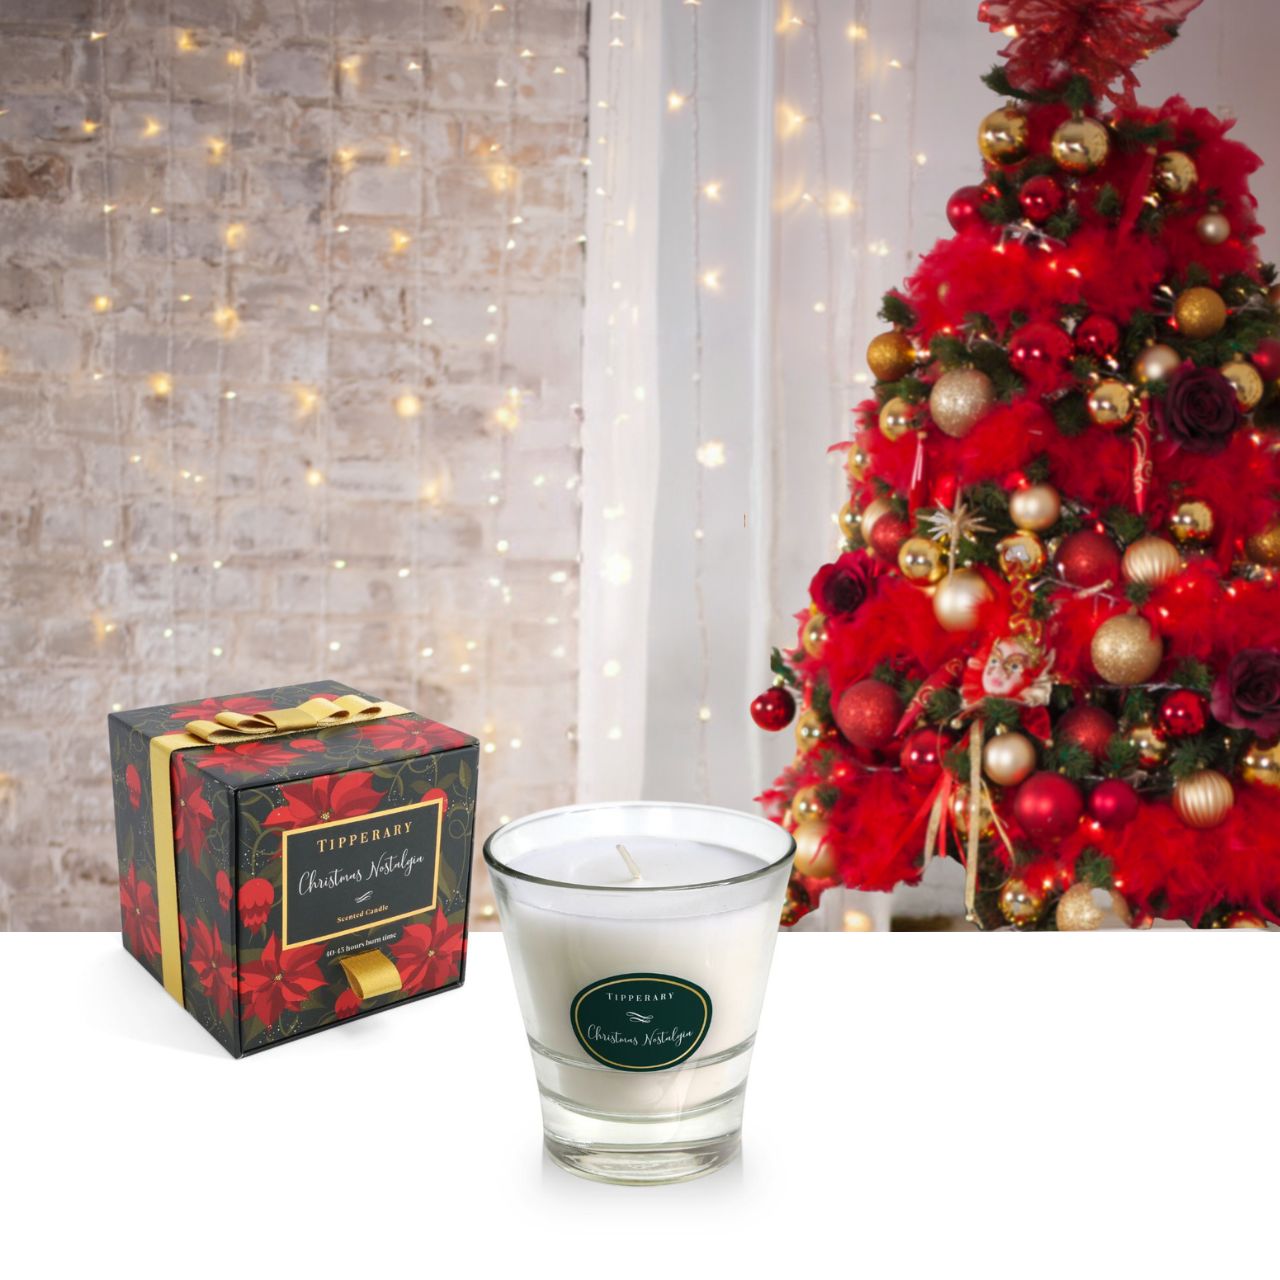 Christmas Nostalgia Poinsettia Tumbler Candle by Tipperary  A Christmas tree scent blended with spices fills the room with nostalgia and happy memories of Christmas.